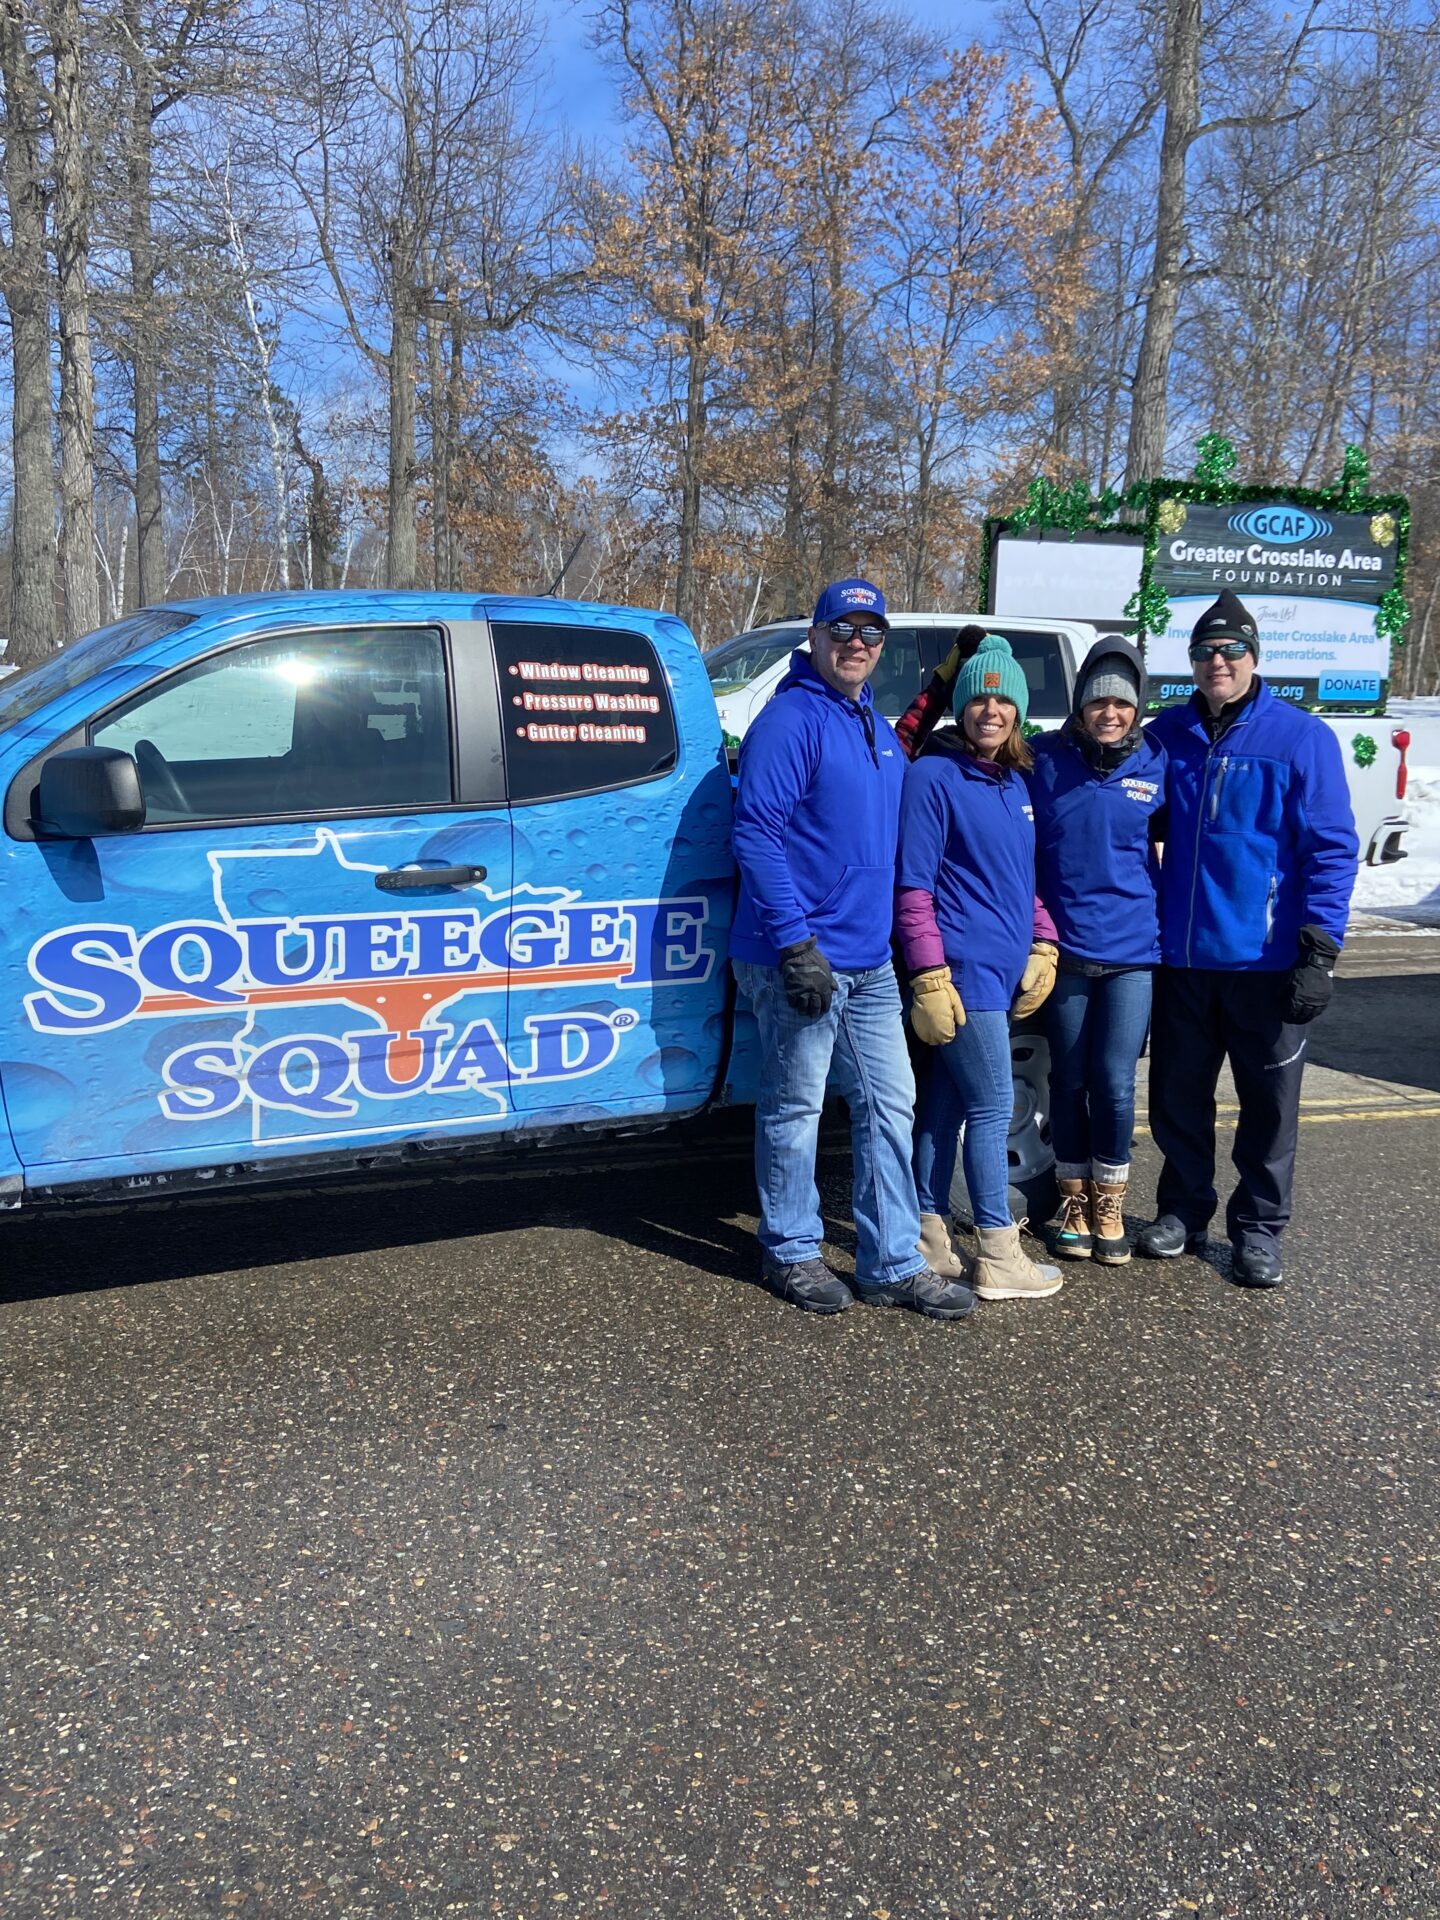 Squeegee Squad Brainerd Lakes Joins The Crosslake St. Patty's Day Parade!